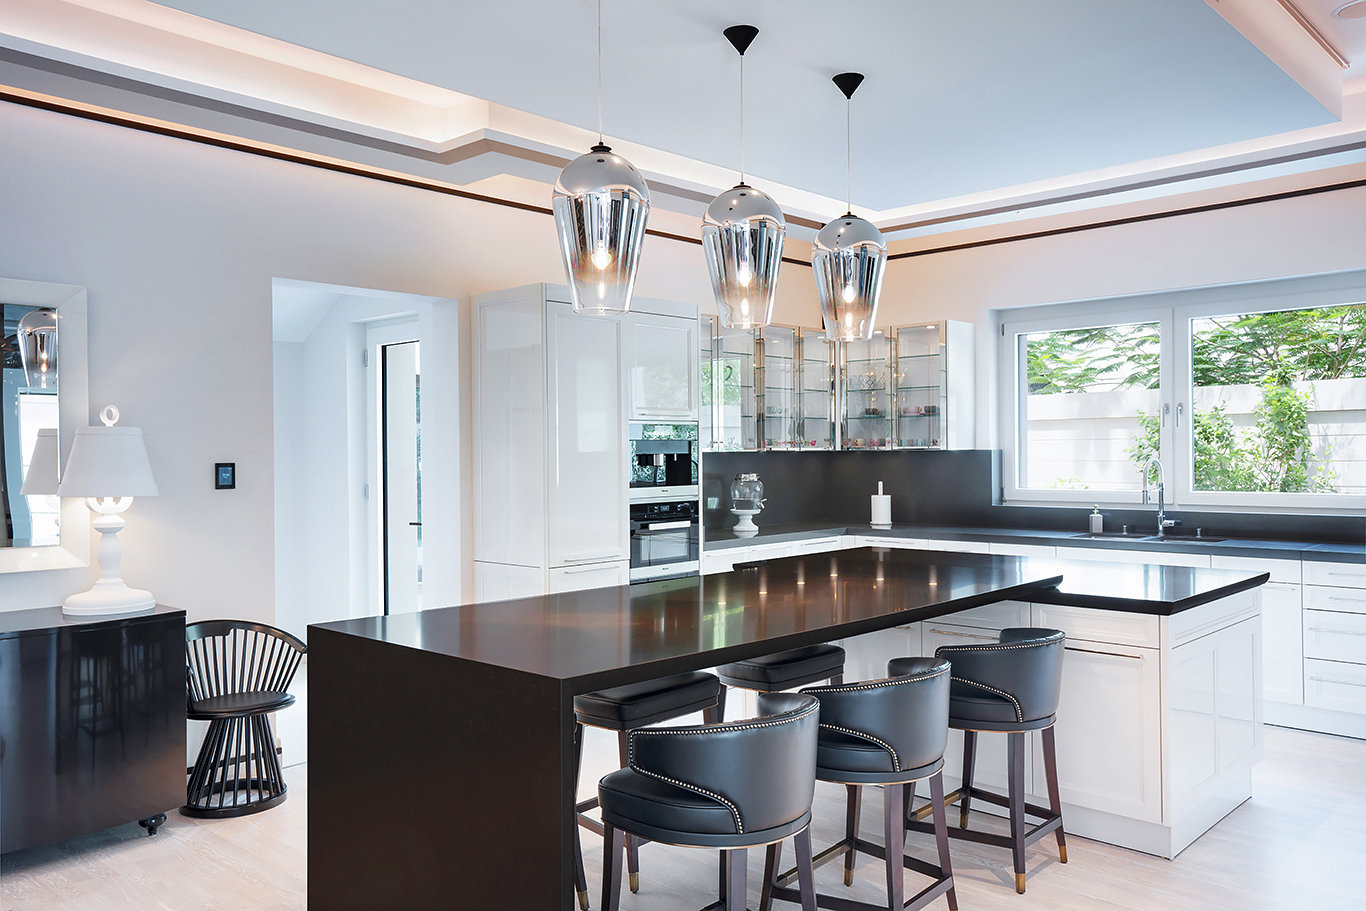 SieMatic’s Key Projects in UAE - Luxury German Kitchens